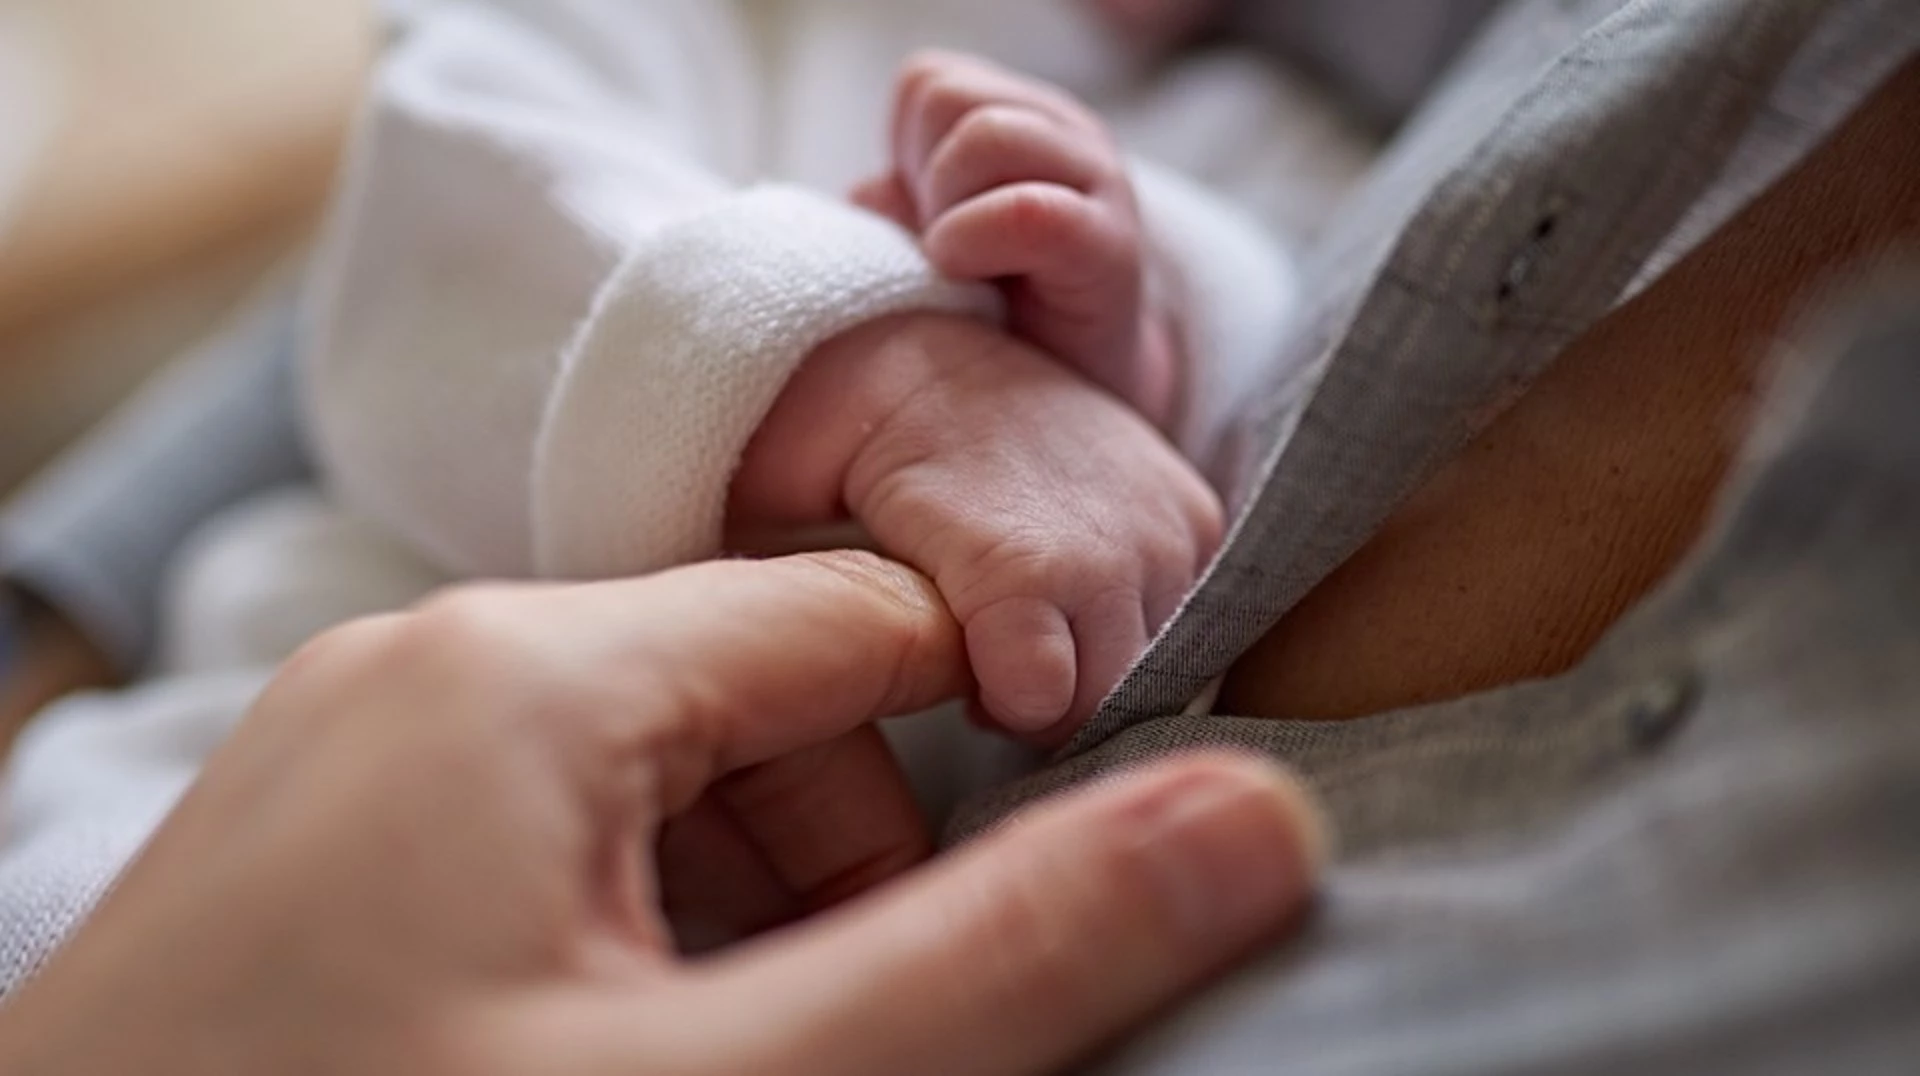 https://www.aptaclub.co.uk/content/dam/sn/local/gbr/aptamil/article-images/baby-holding-finger.jpg